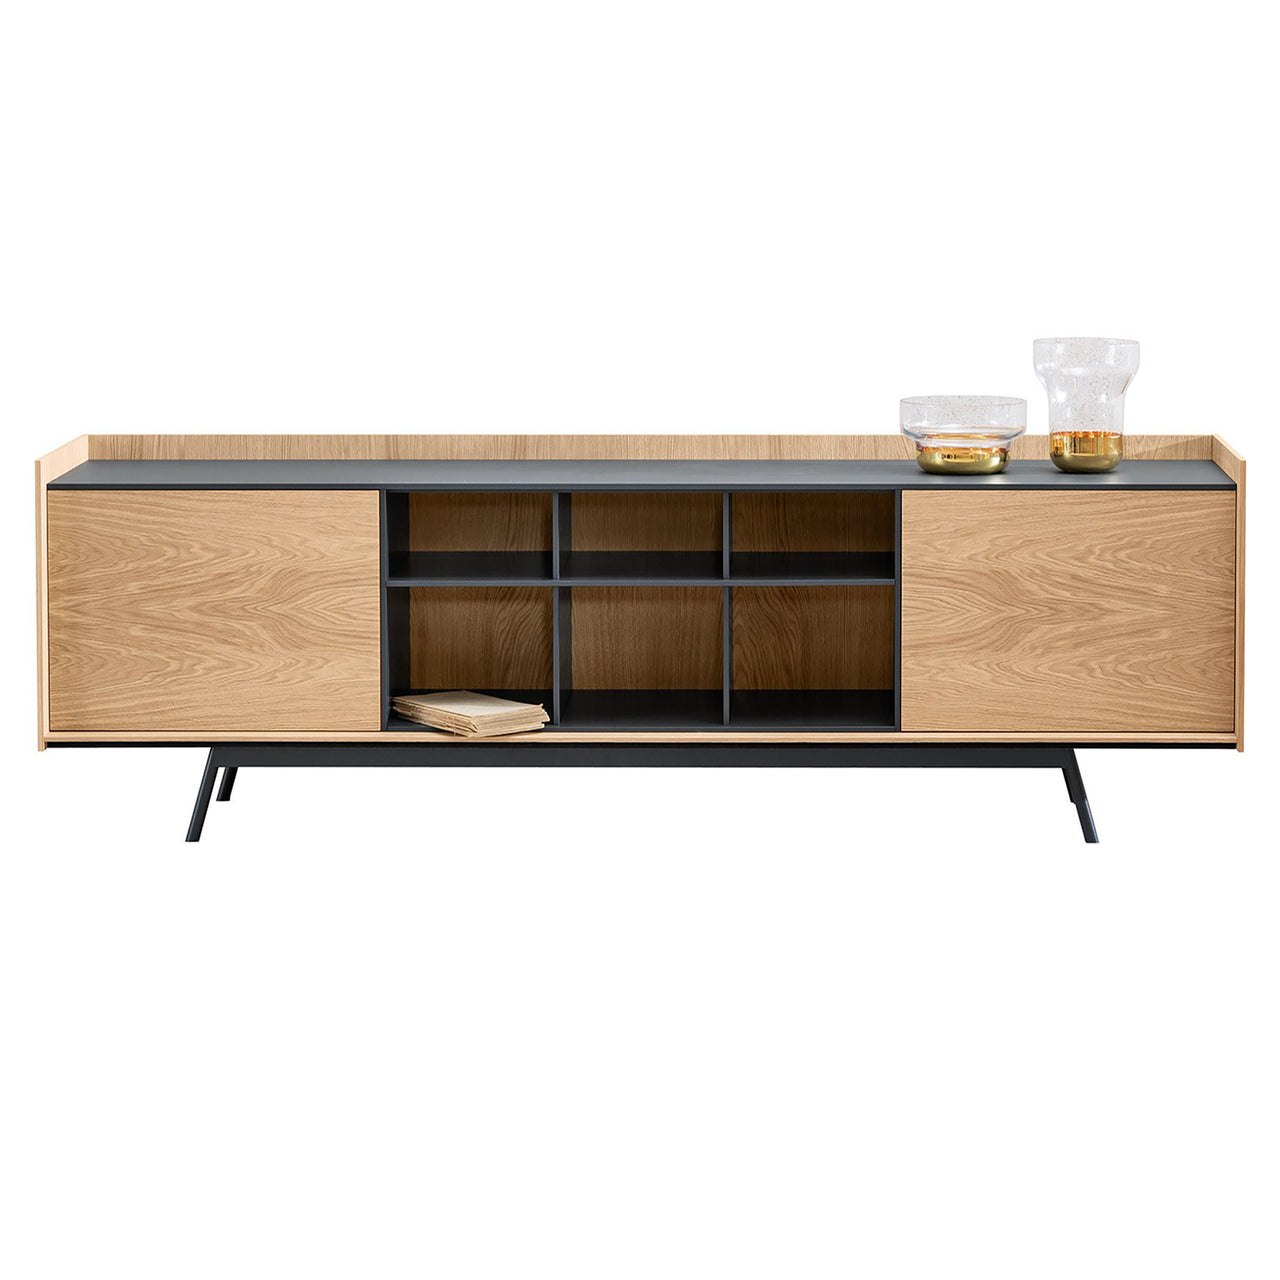 Edge Open Cabinet: Large + Lacquered Anthracite + Lacquered Black + Flamed Oak